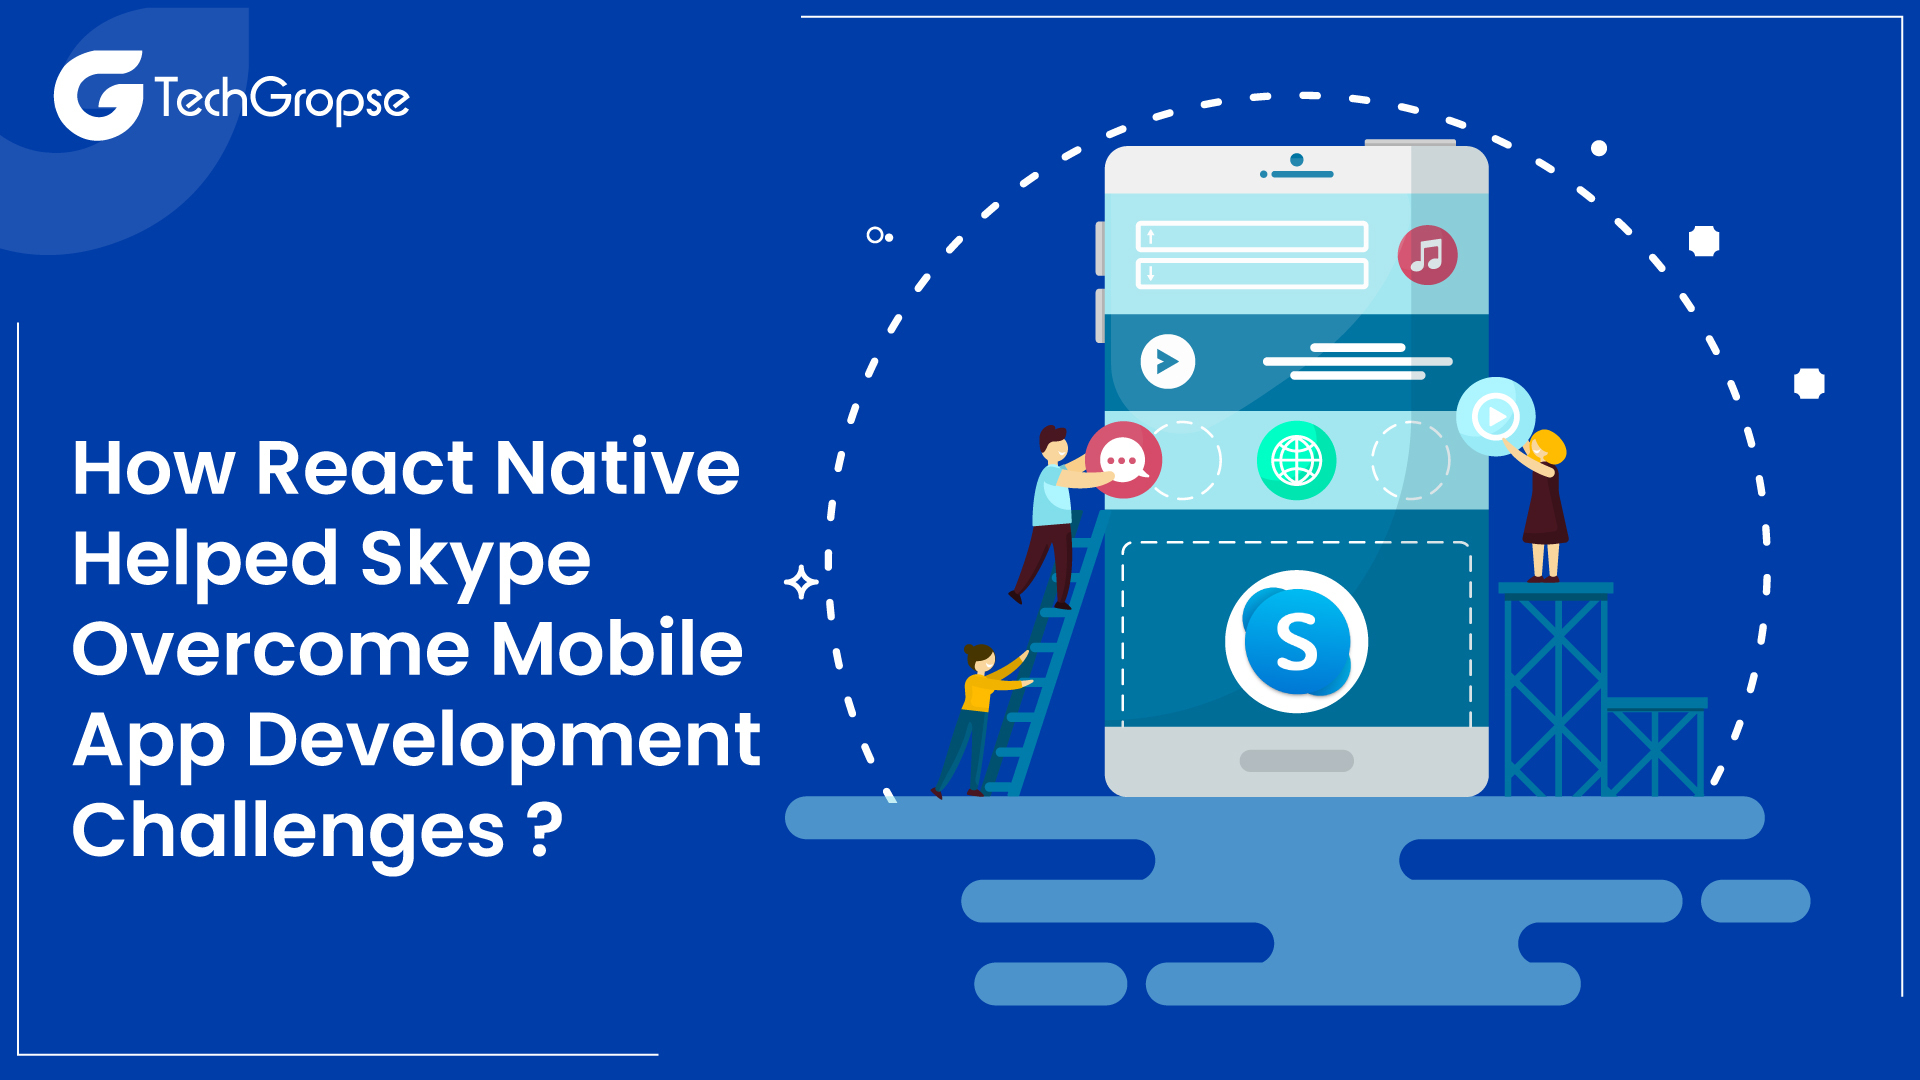 How React Native Helped Skype Overcome Mobile App Development Challenges